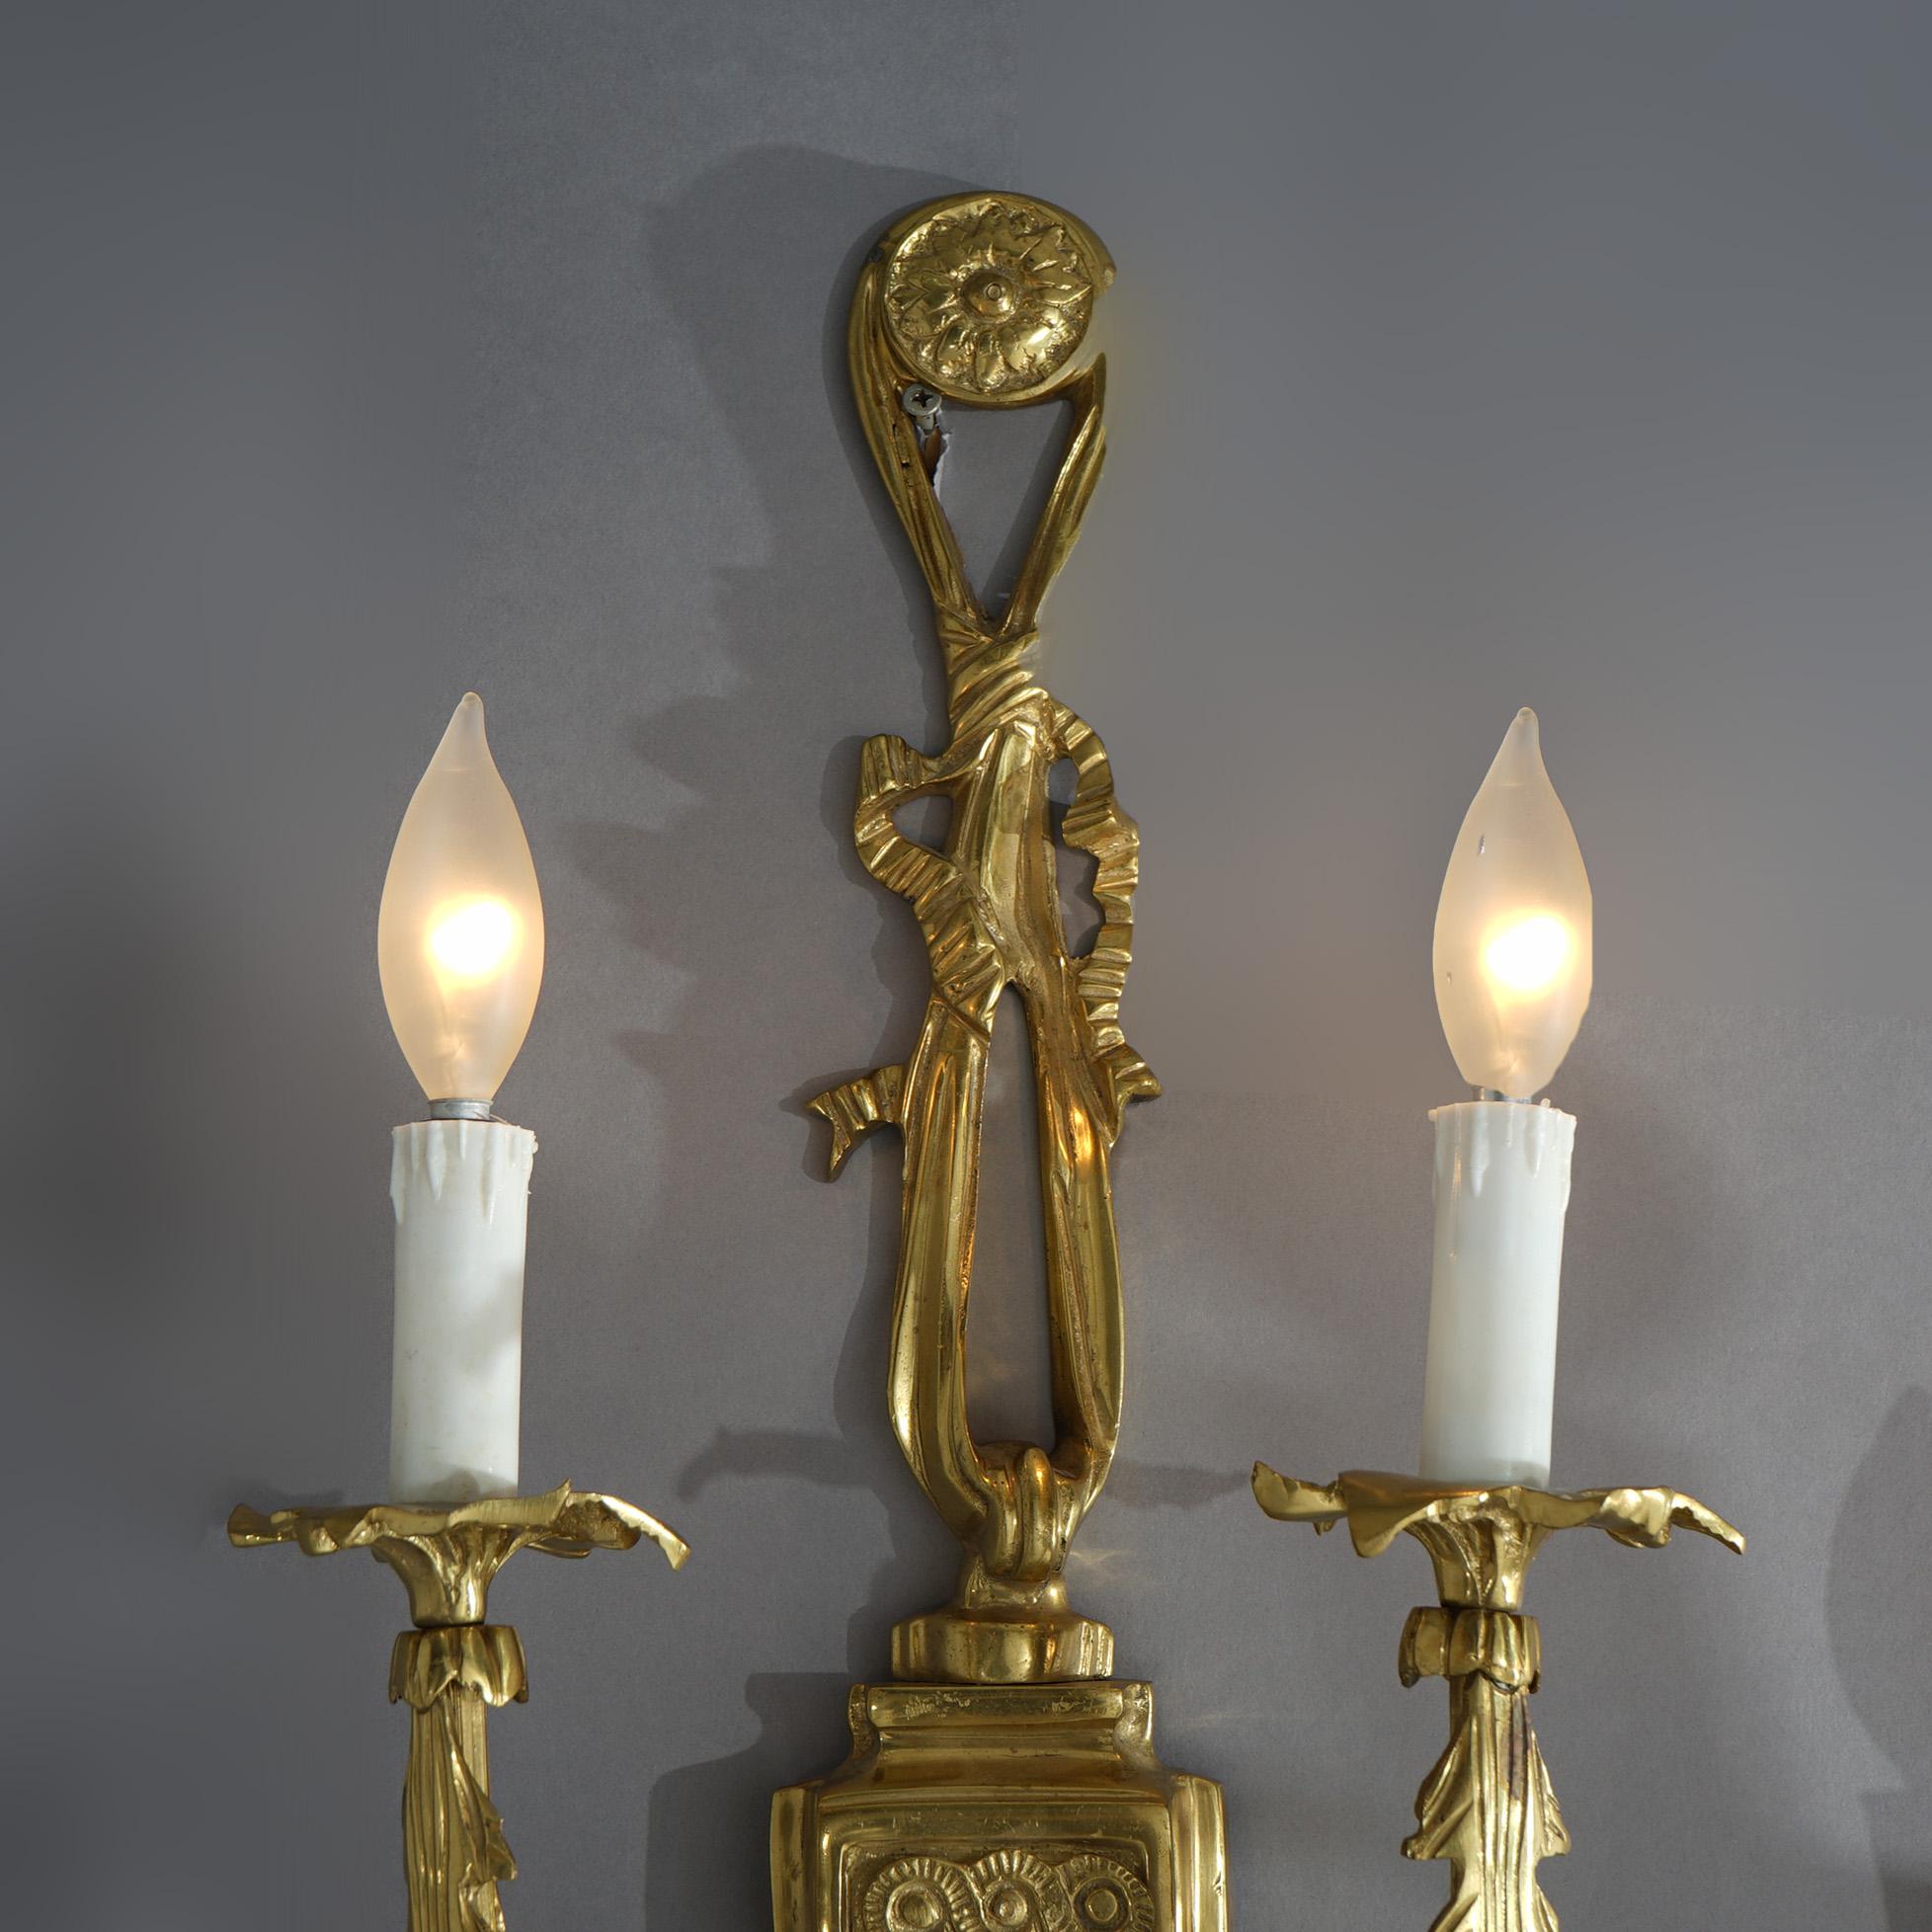 Cast Pair French Empire Style Gilt Bronze Double-Light Wall Sconces 20th C